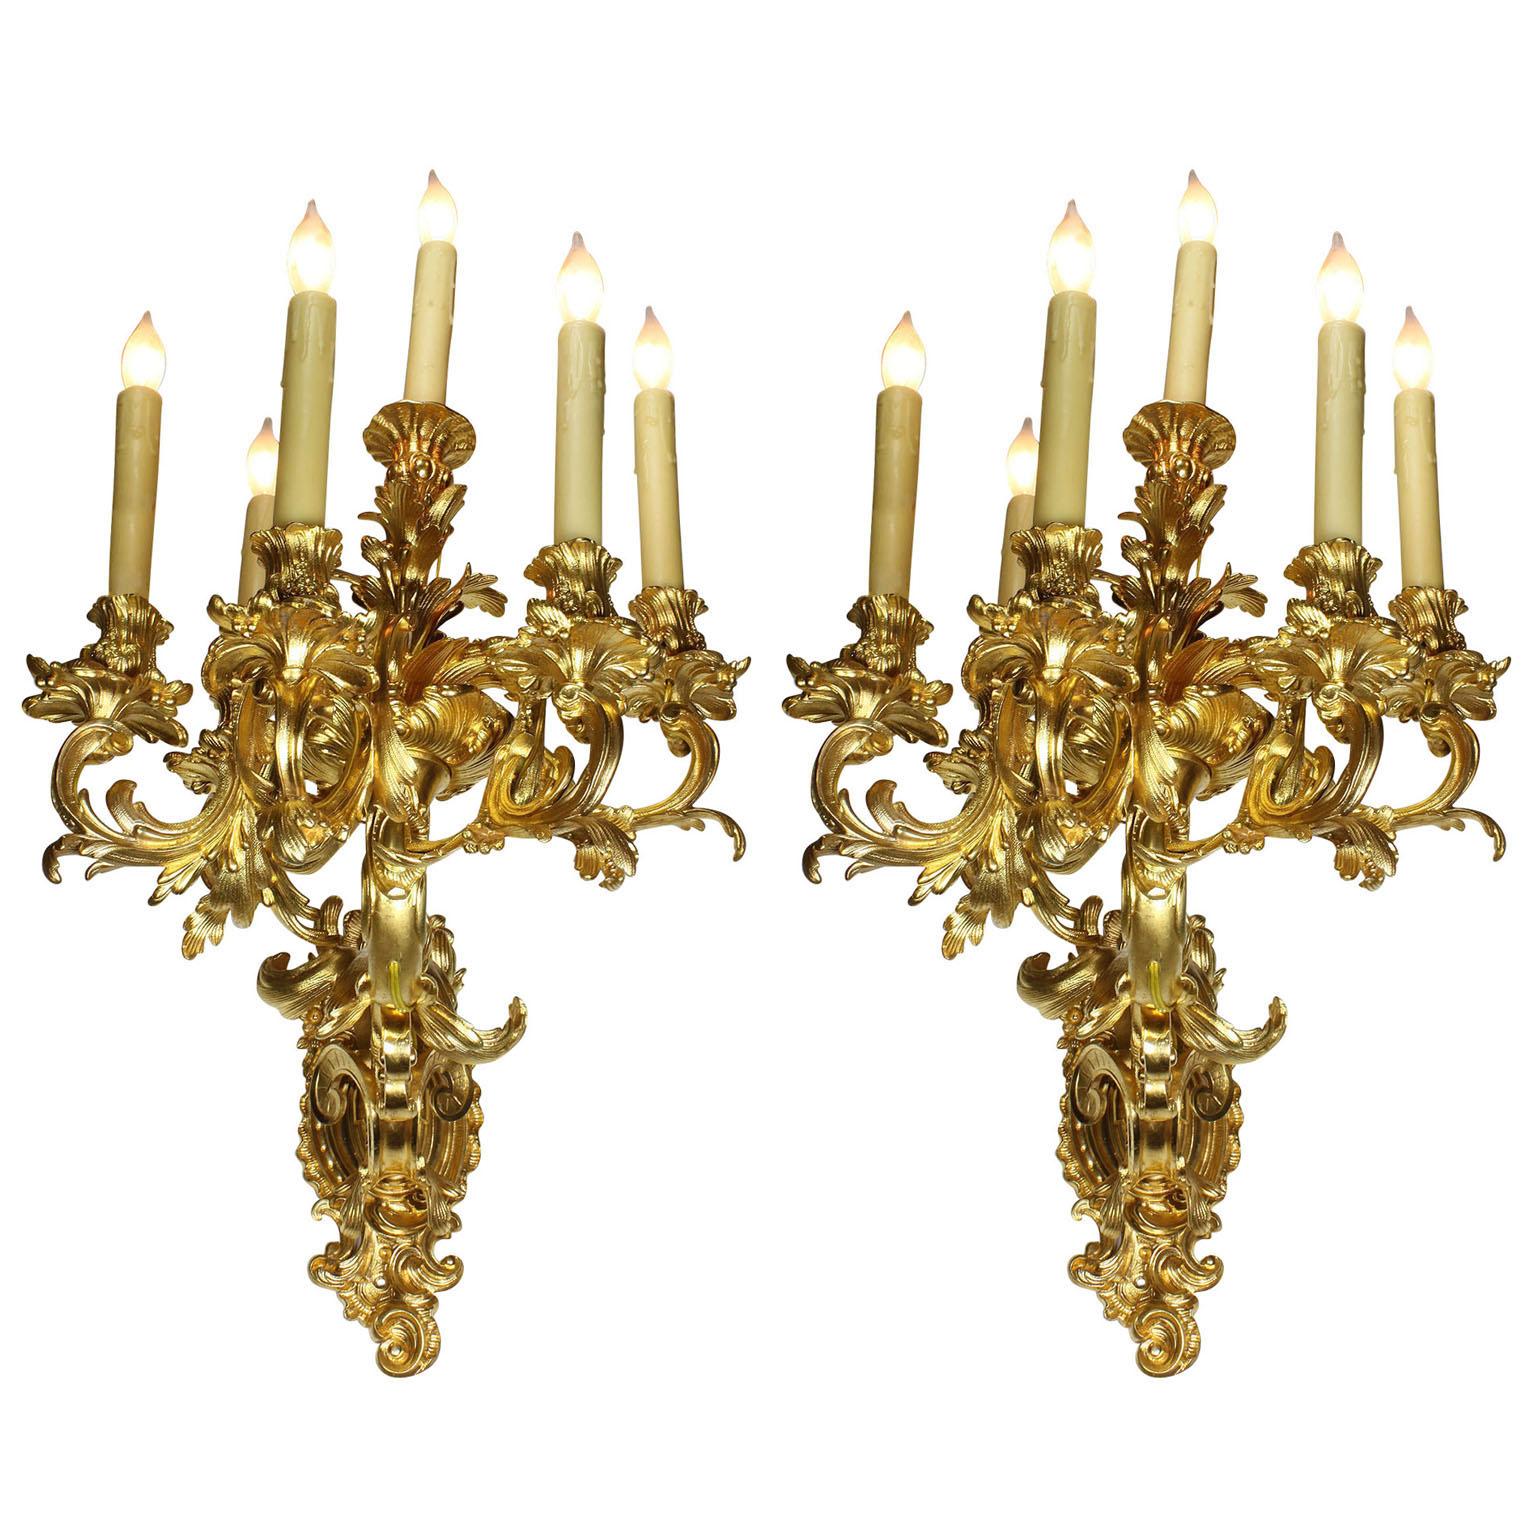 A very fine and impressive pair of French 19th century Louis XV style Rococo style six-light gilt-bronze wall lights - wall sconces. The ornate six-light candelabrum with five scrolled candle-arms with flowers, leaves and acanthus and centred with a